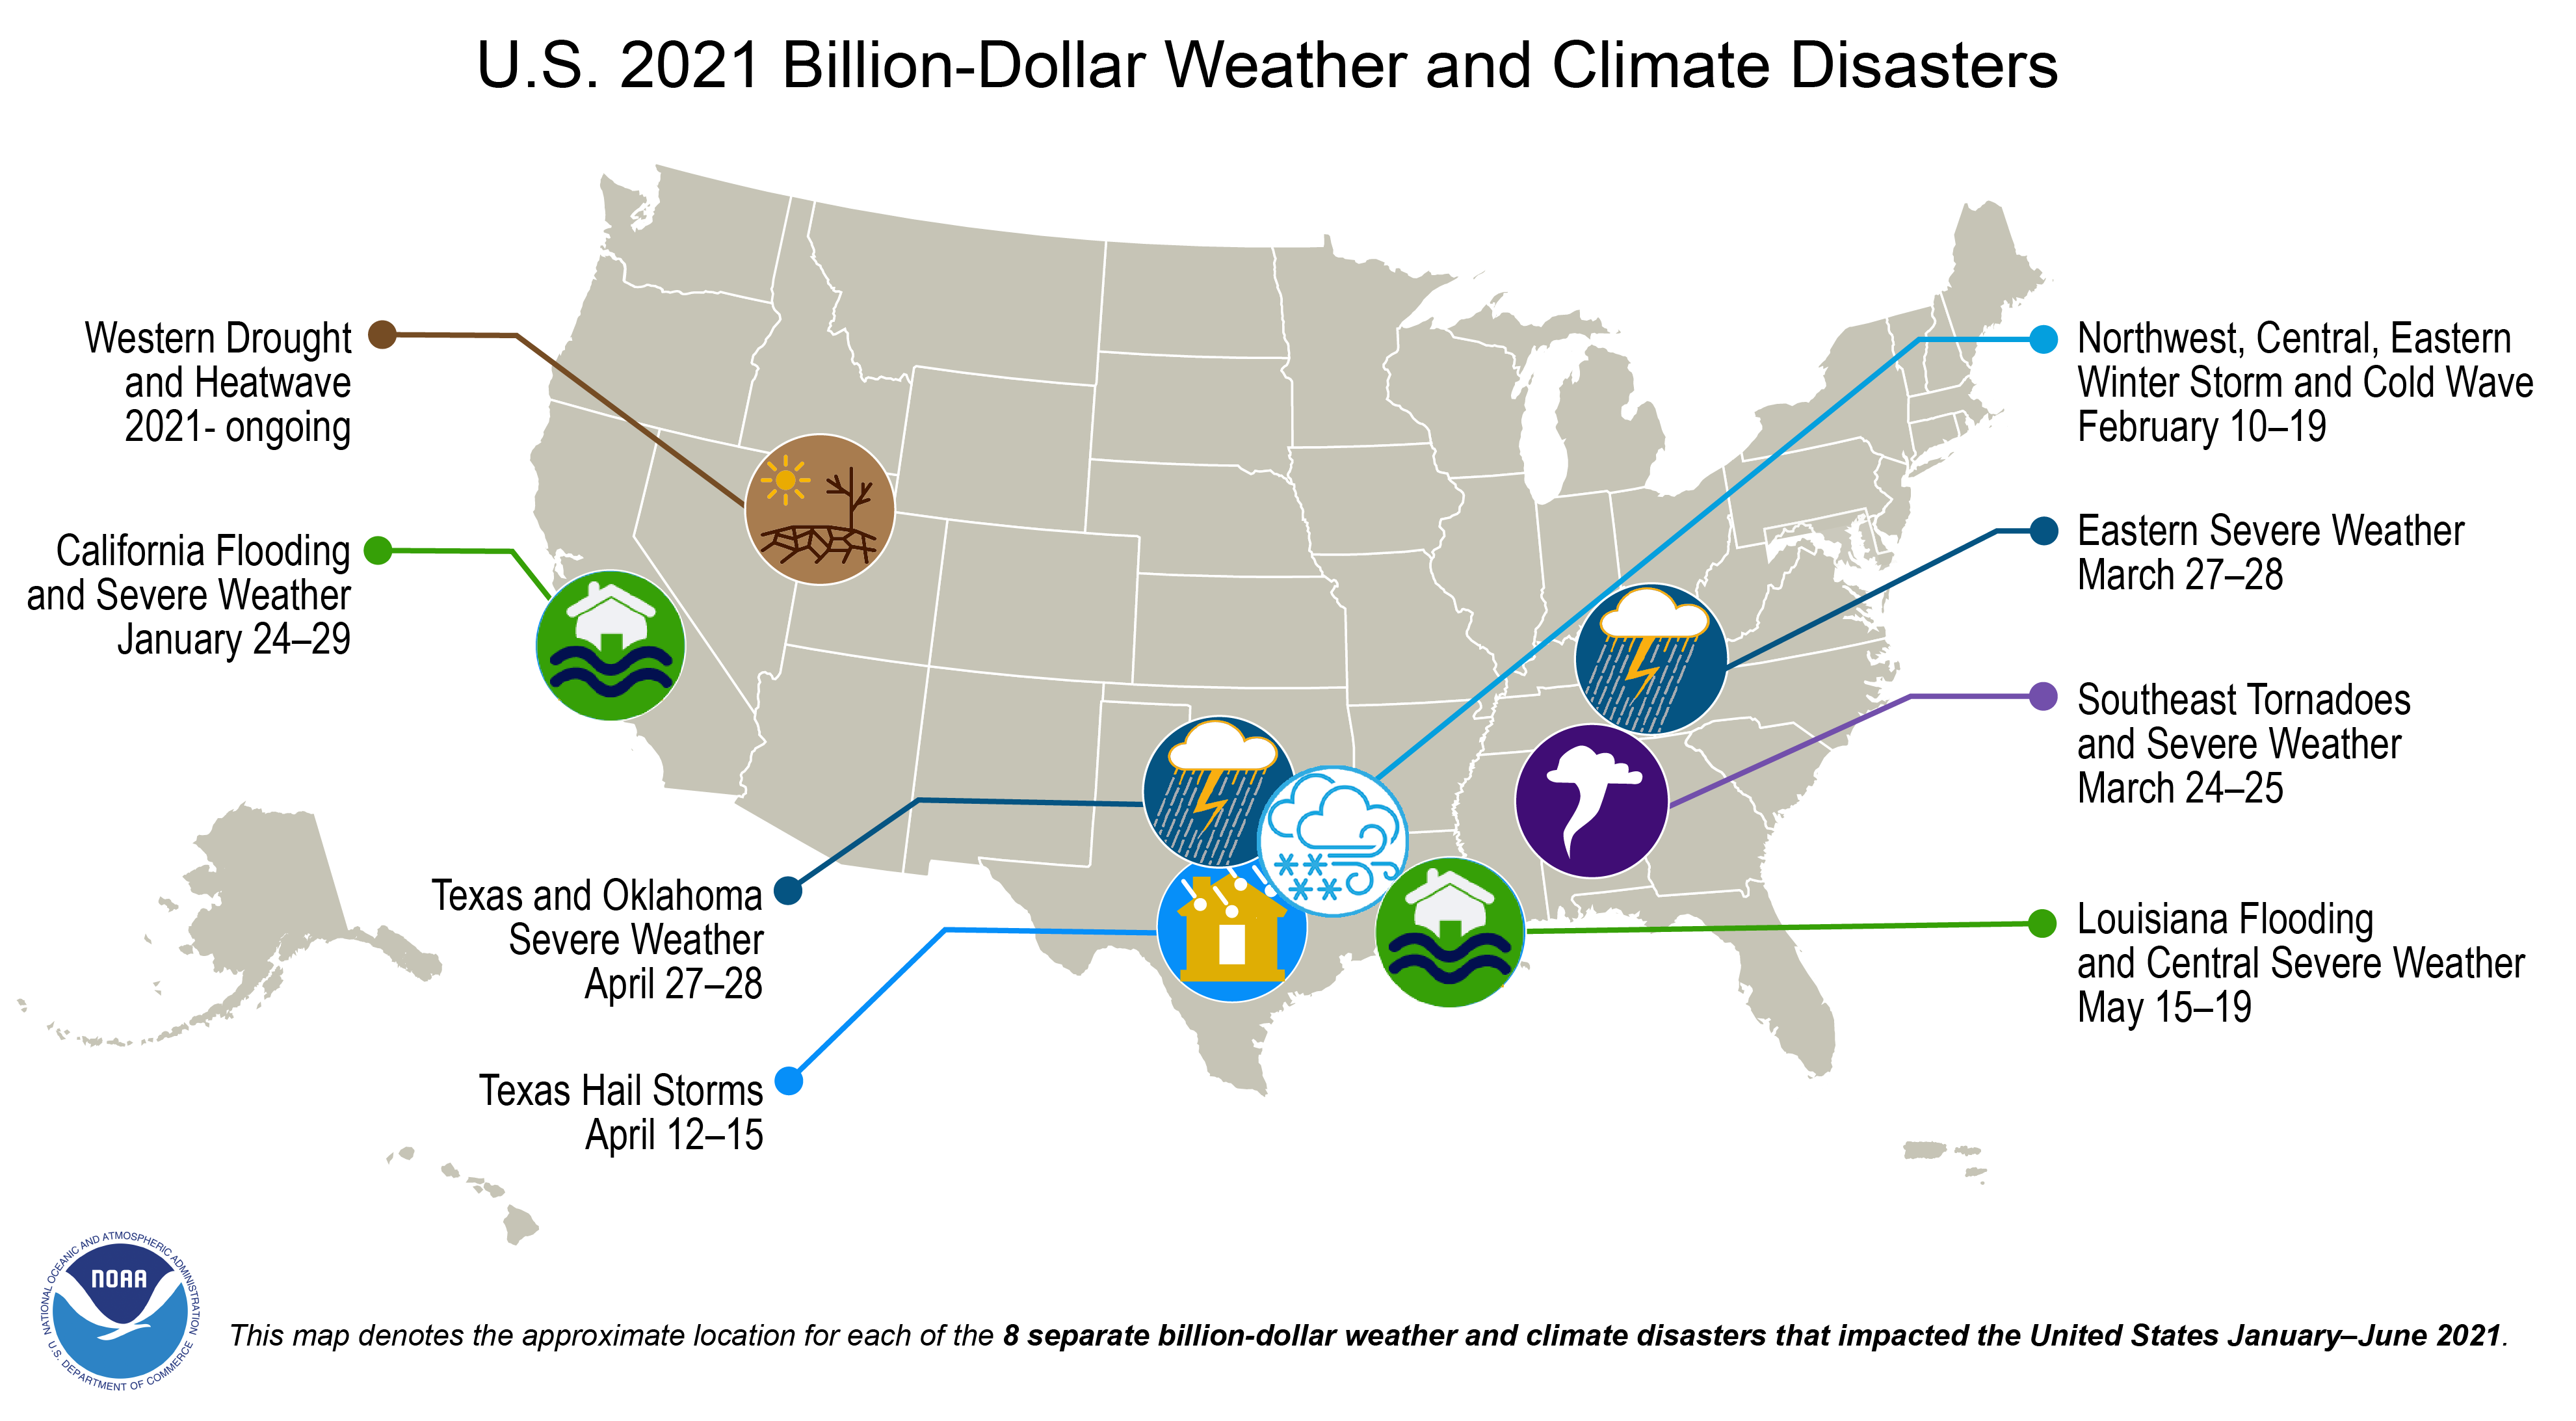 A U.S. map plotted with 8 billion-dollar weather and climate disasters that occurred in the first six months of 2021.